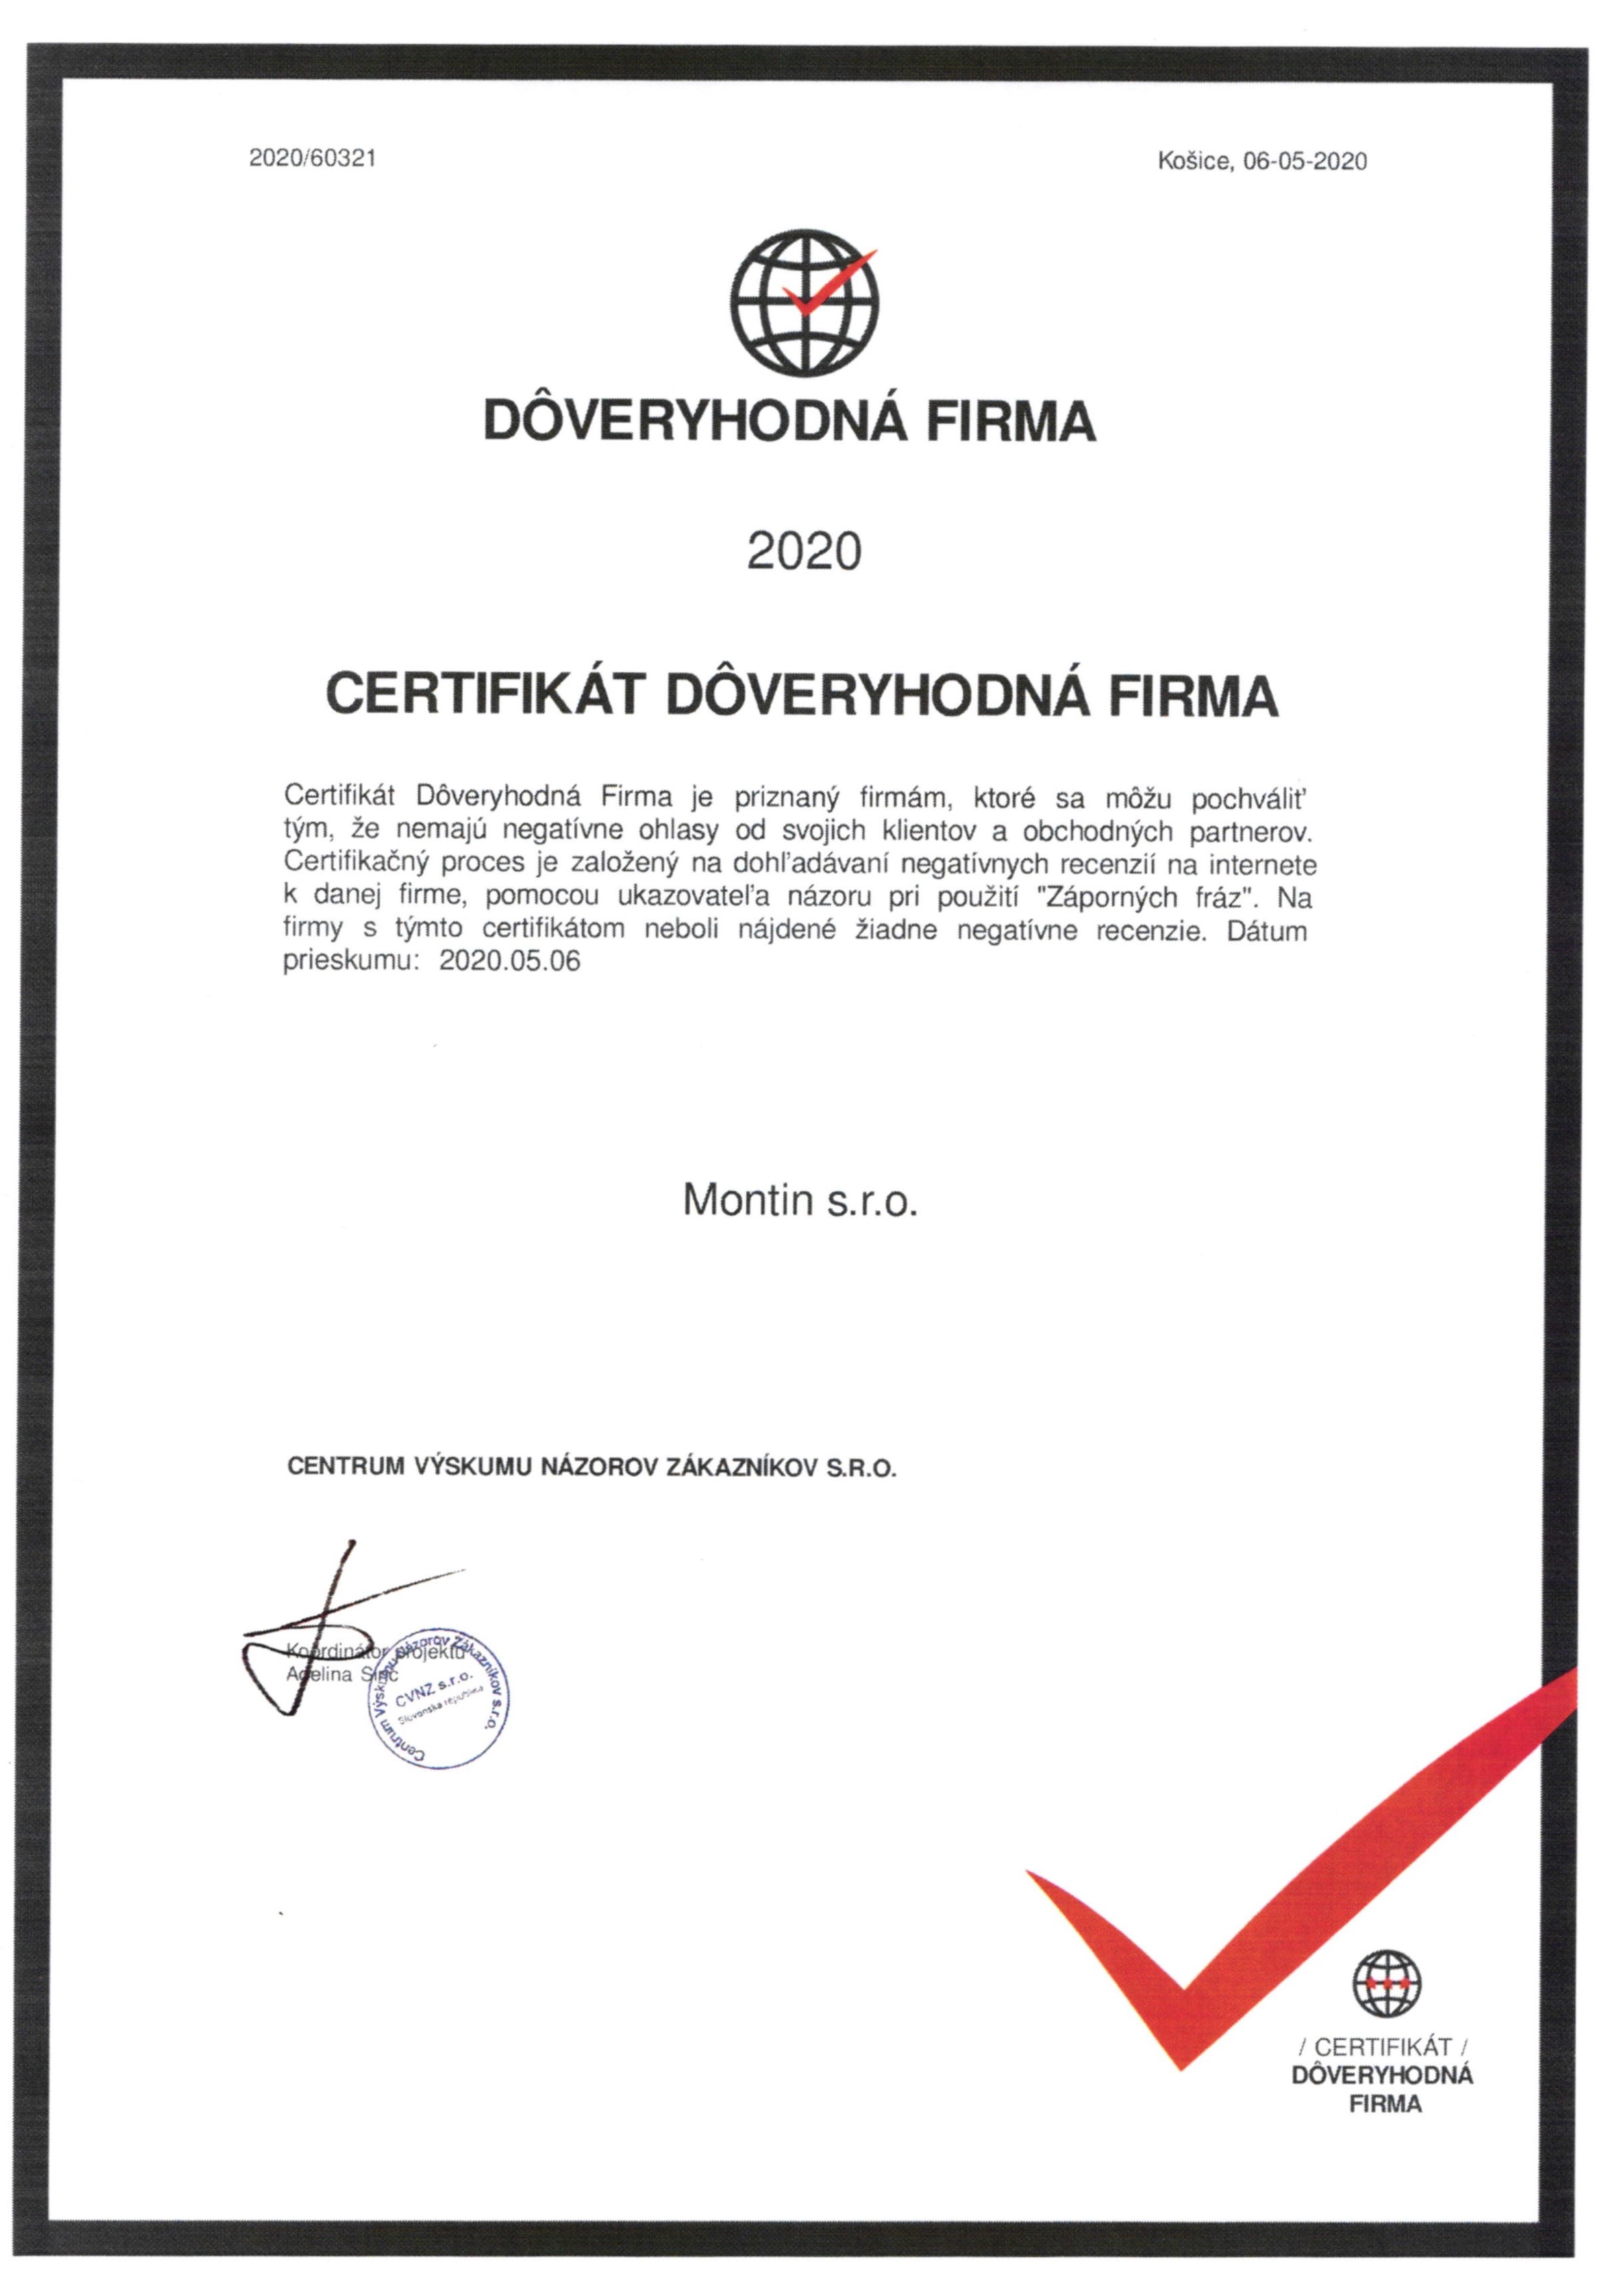 Trusted Company 2020 Certificate